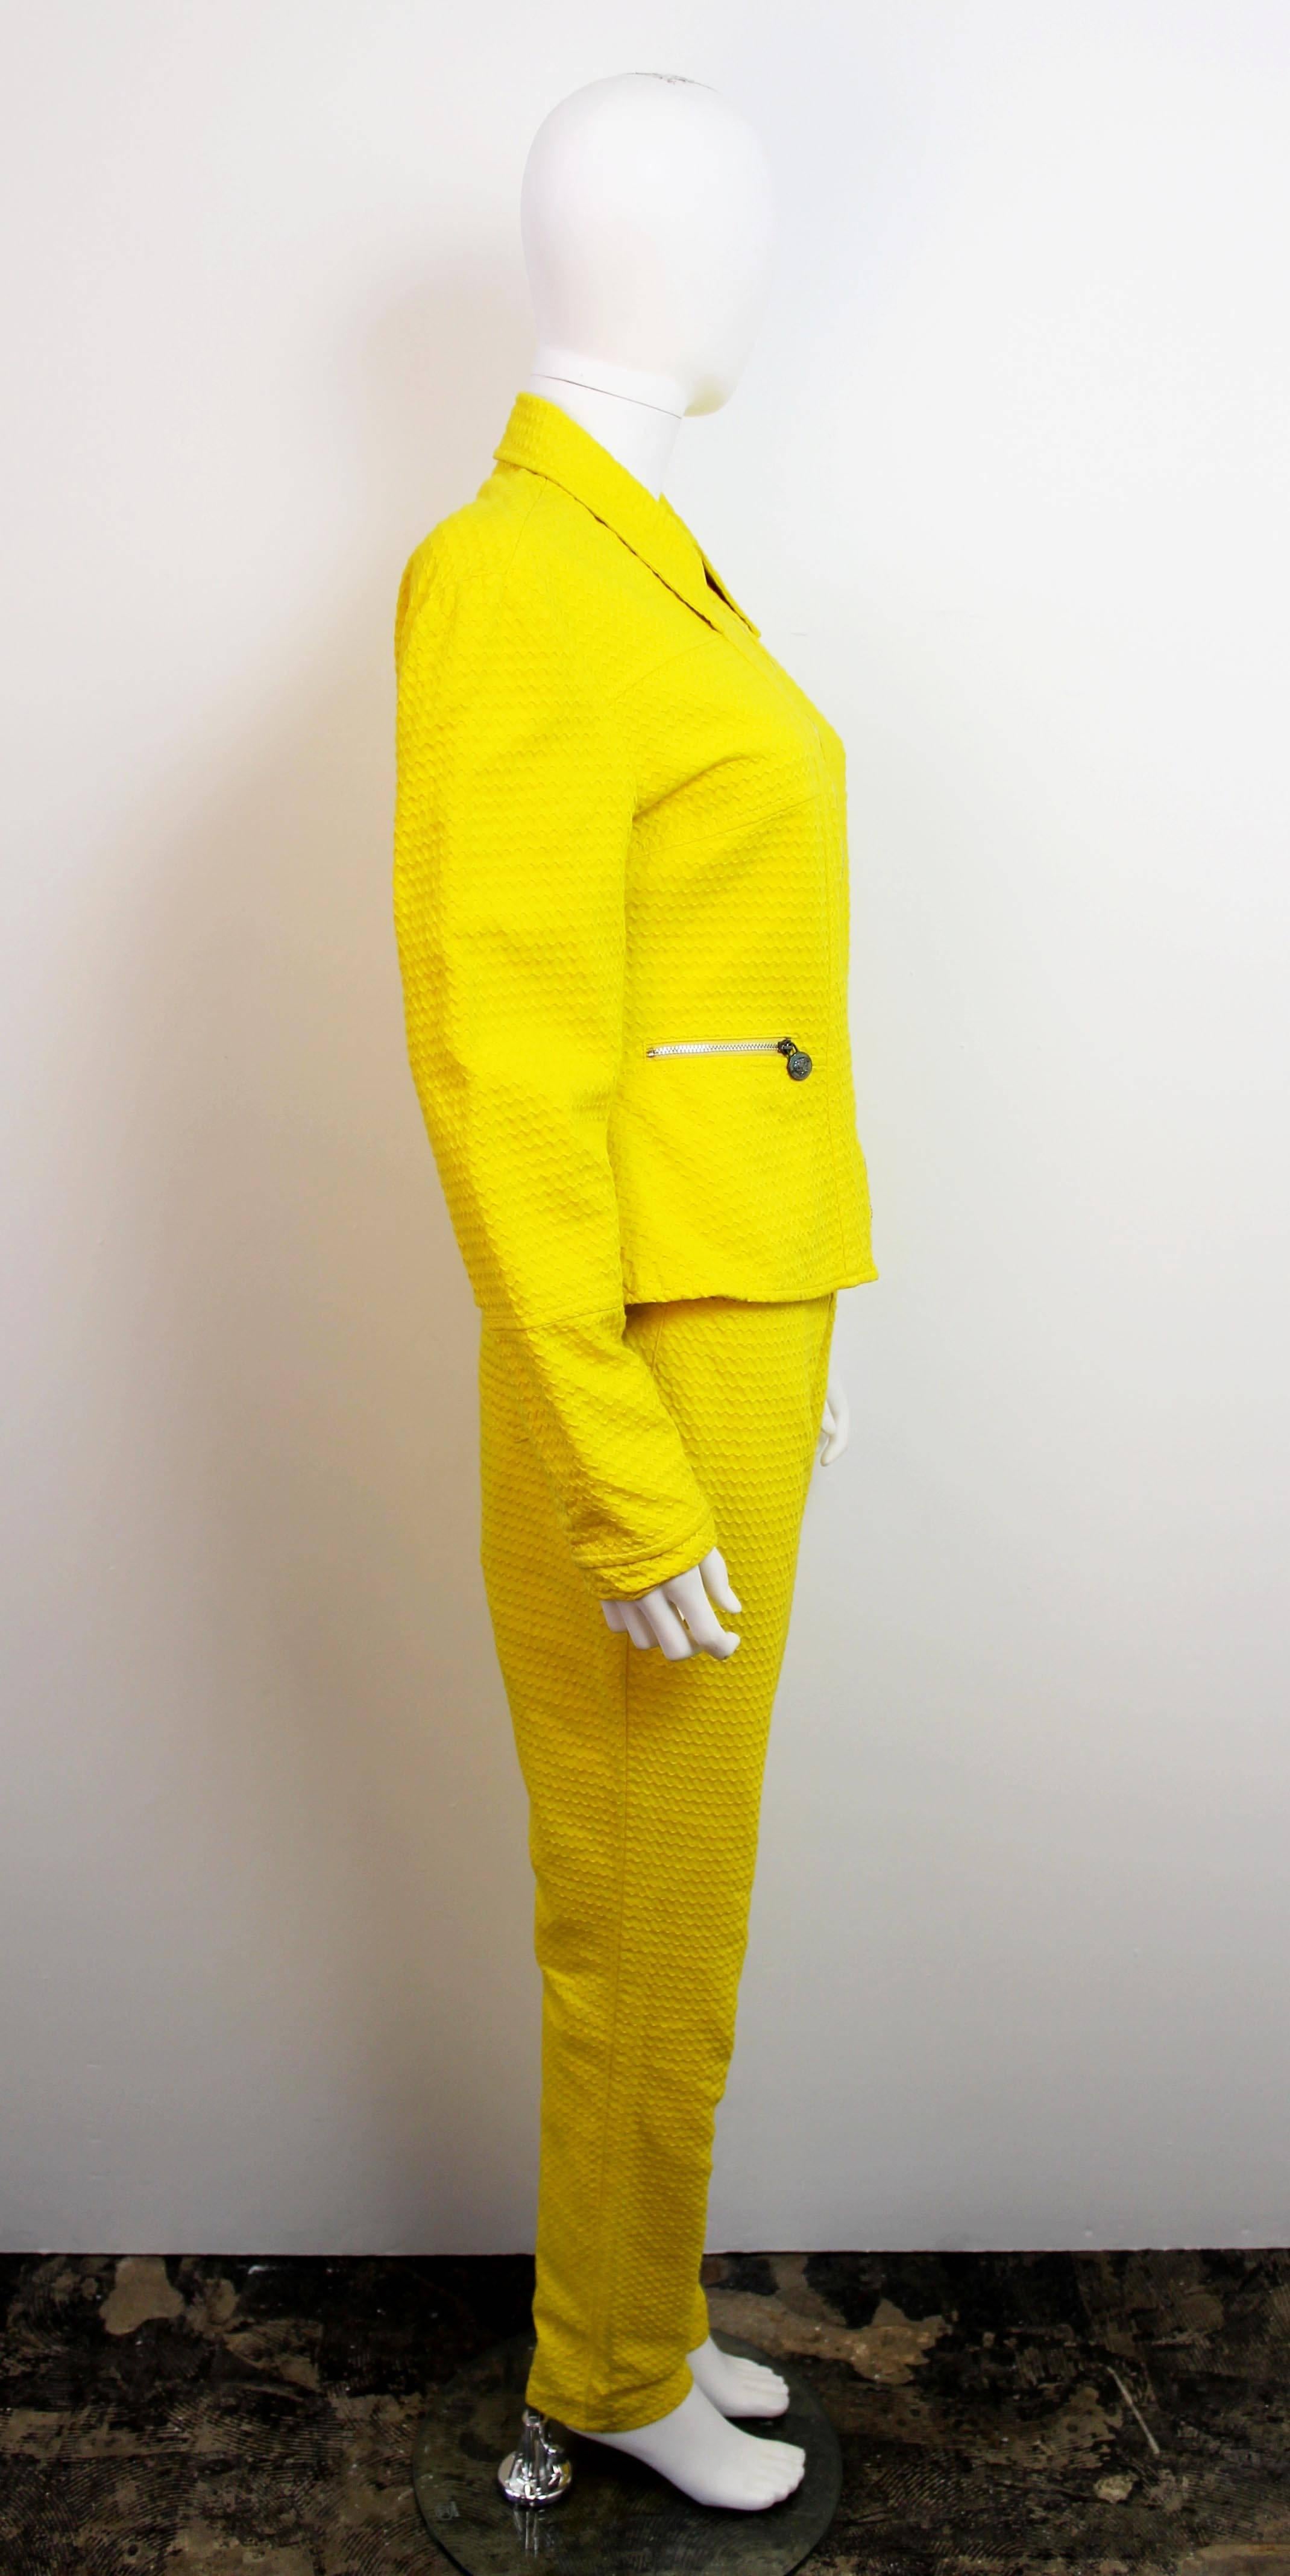 Vintage 1990's Versace Jeans Couture yellow two-piece suit. Features a zig-zag printed cotton motif and a 70's inspired shape. Has medusa head zipper tabs.